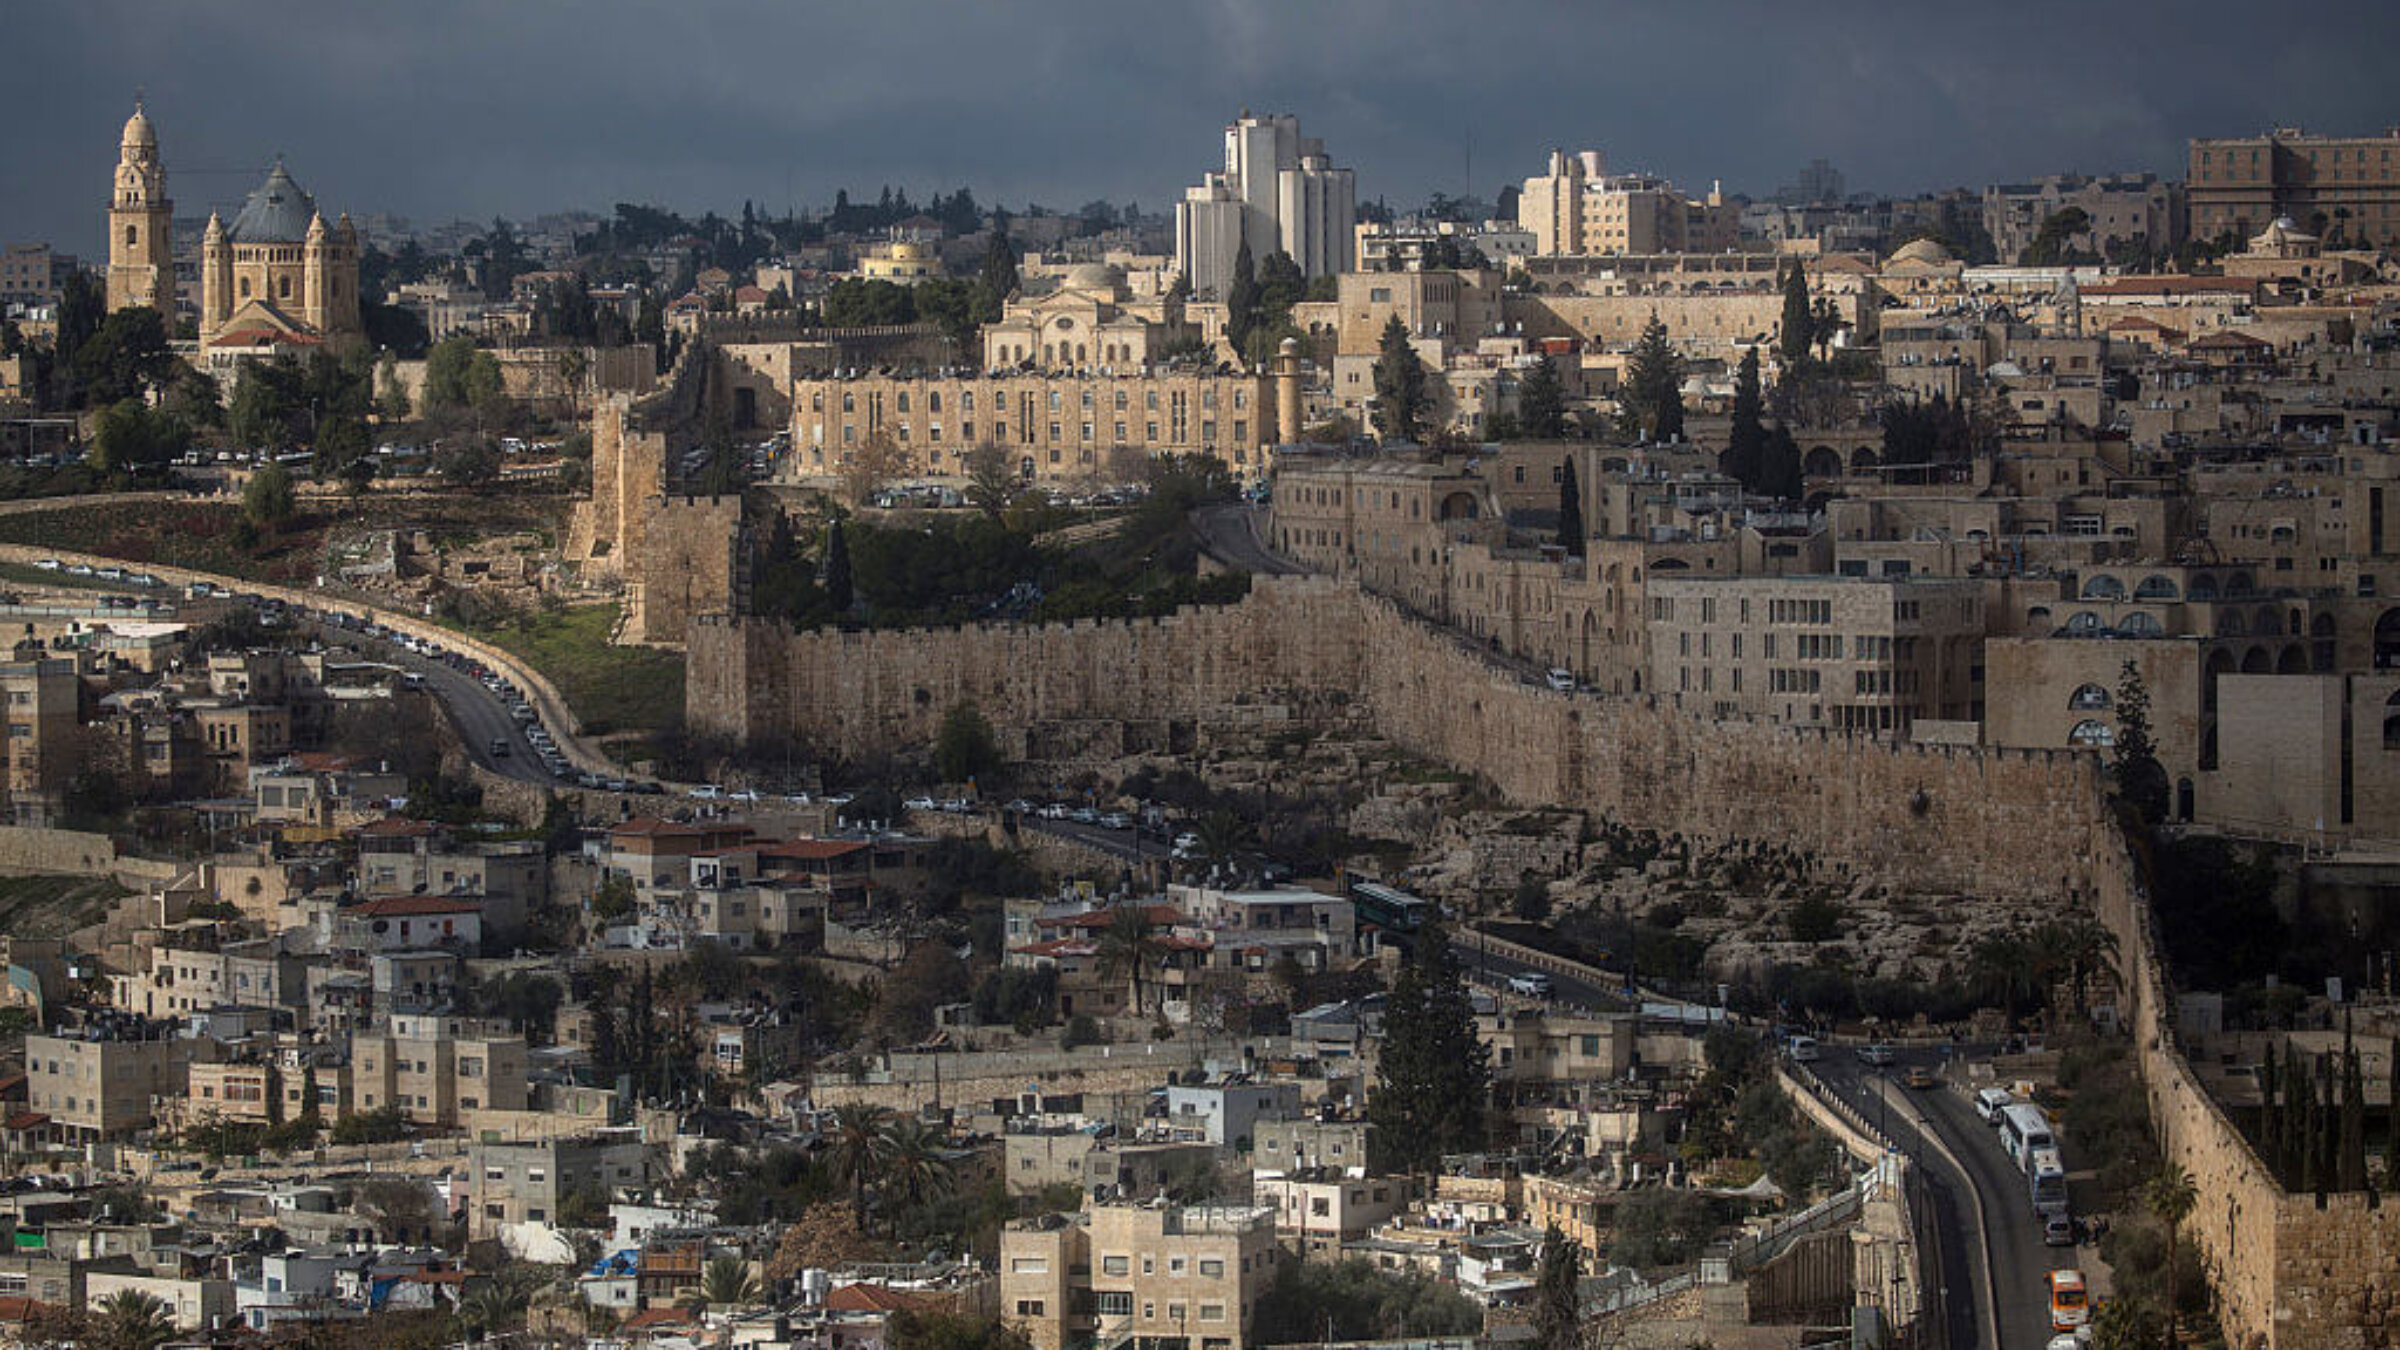 The Old City is seen from the Mount of Olives on Jan. 13, 2017, in Jerusalem, Israel.